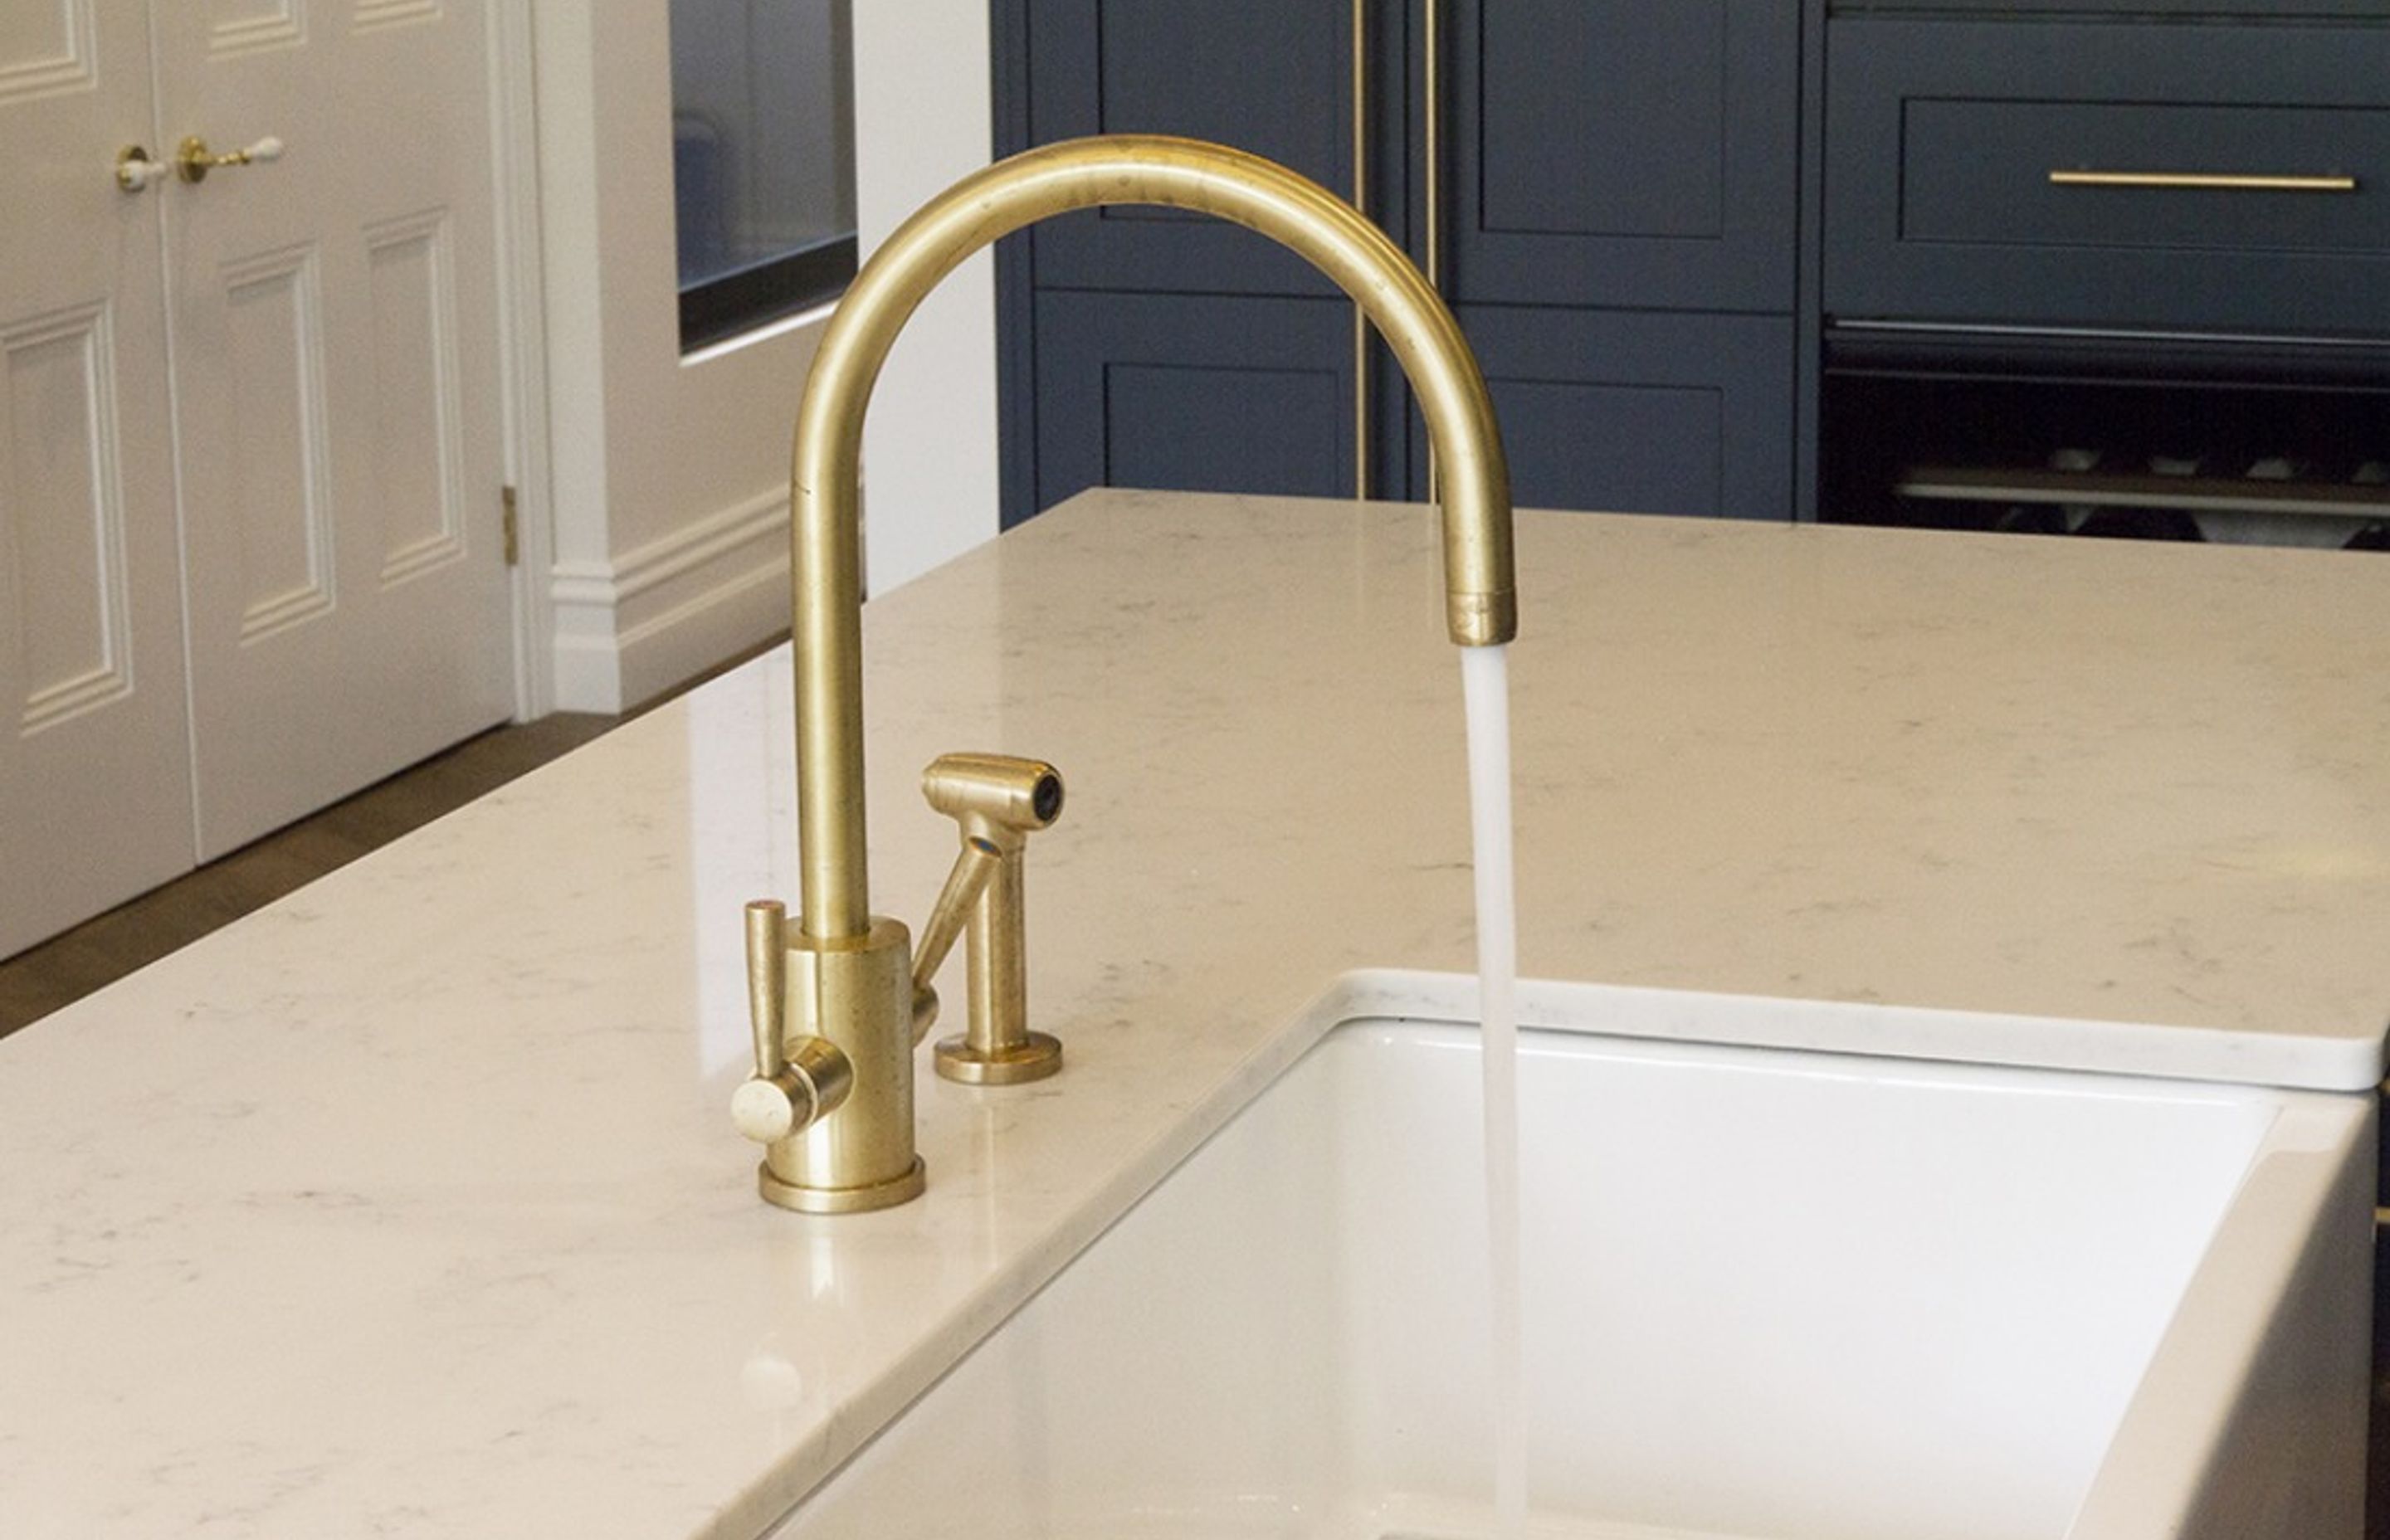 The Orbiq kitchen tap with spray rinse. All tapware can be supplied in Satin or Polished Brass or electroplated in a choice of finish.